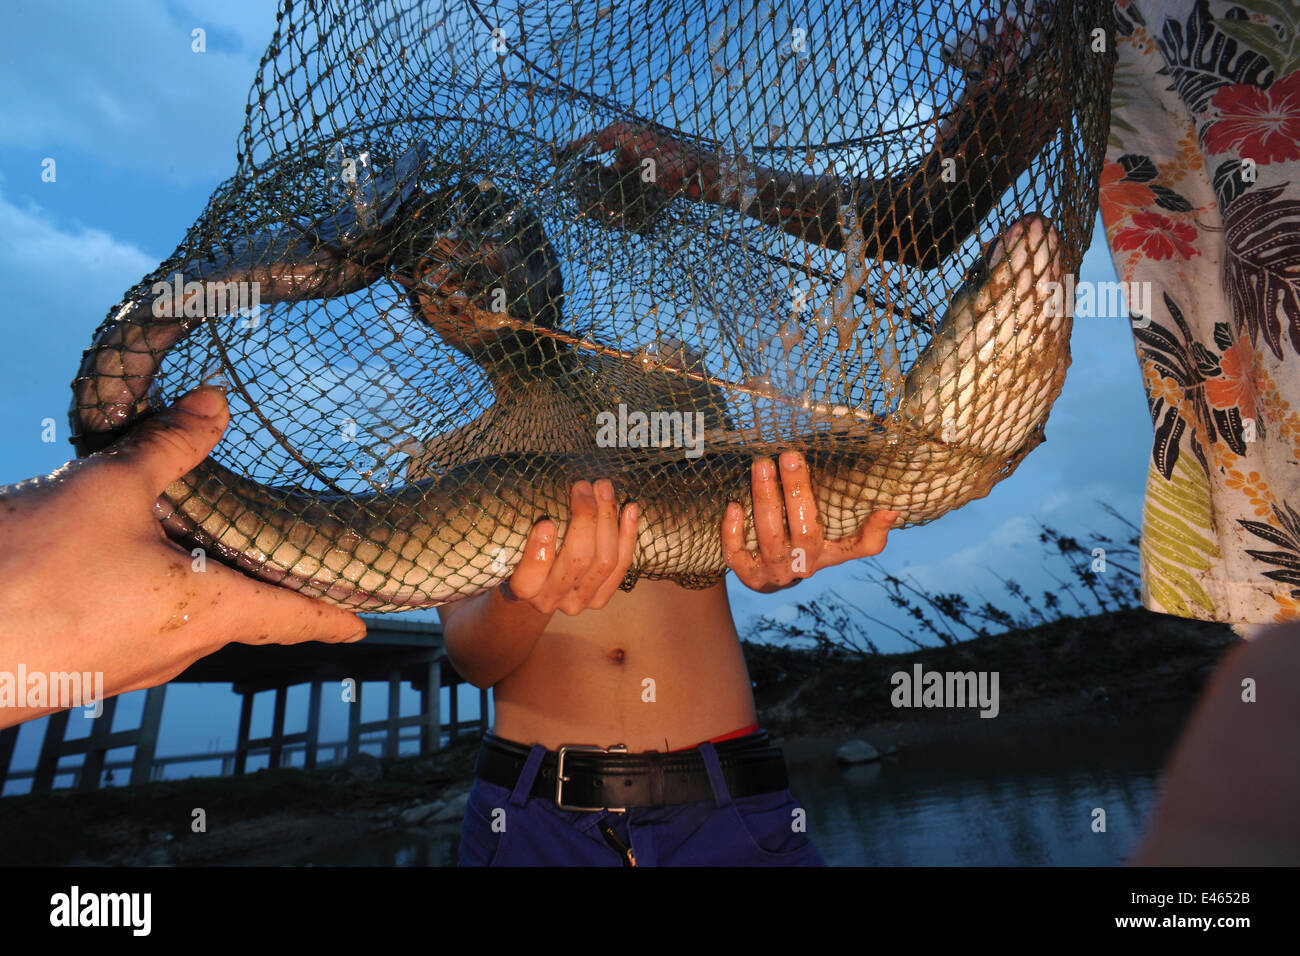 Marbled eel (Anguilla marmorata) captured by local people and being held up in net, Hainan Island, China. Stock Photo